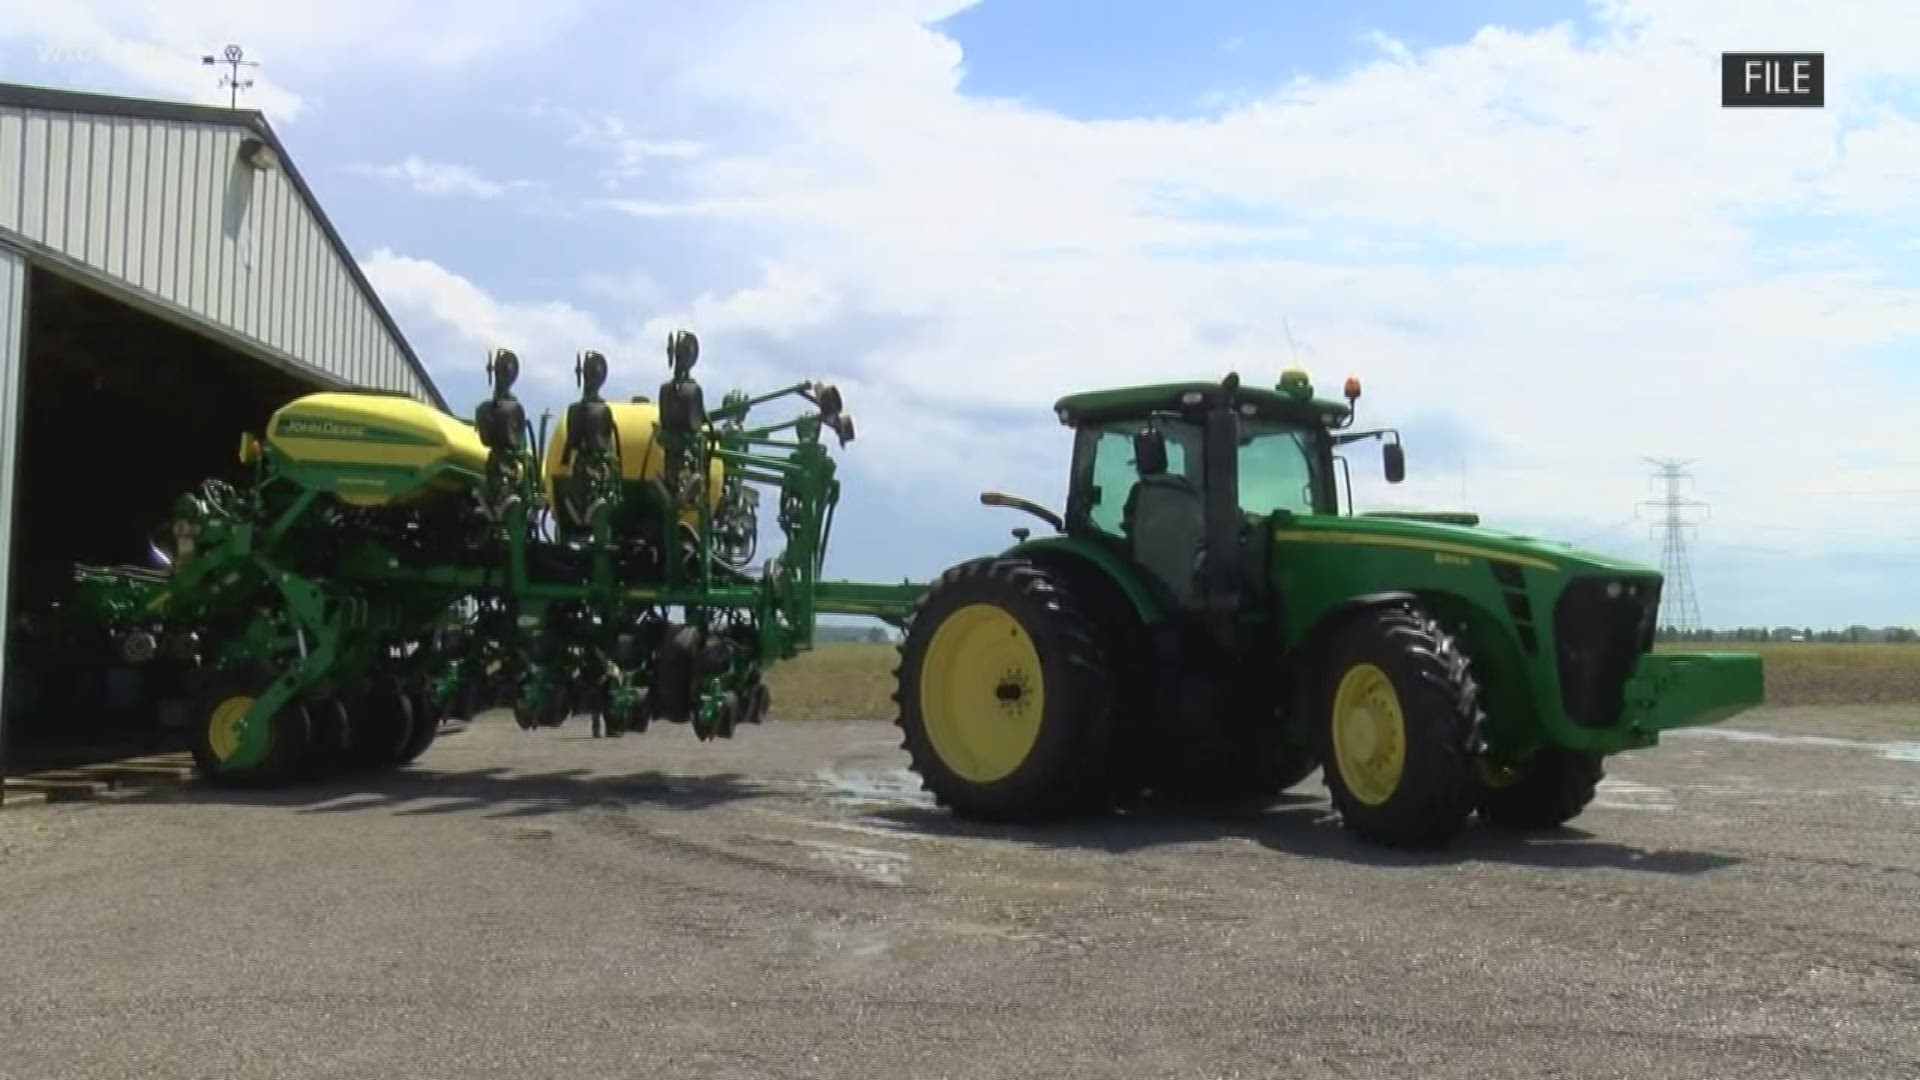 After the wet growing season that impacted a lot of Ohio farmers, an extension program is connecting those struggling with stress with assistance services.